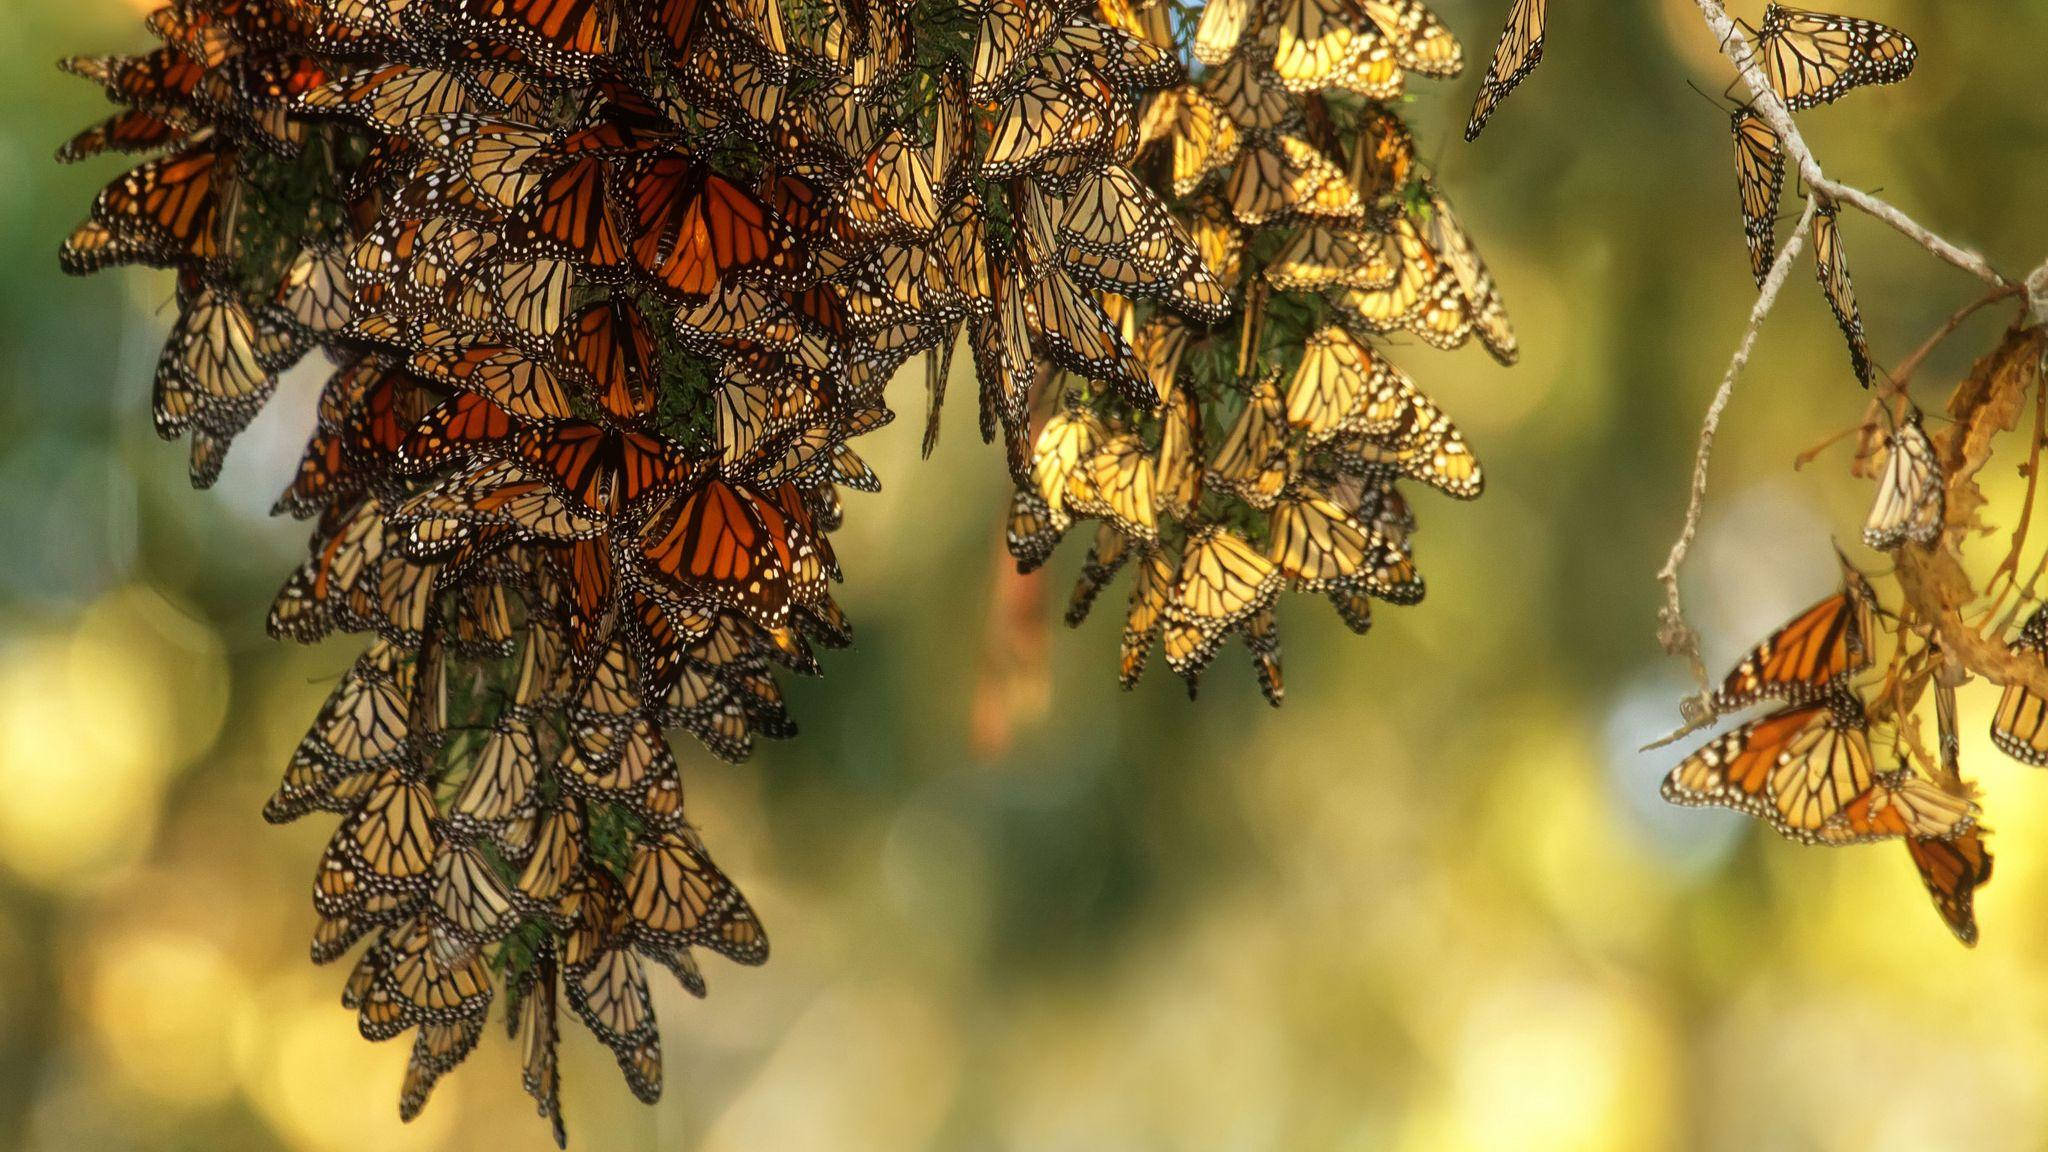 Aesthetic Orange Butterfly Hanging On Branches Wallpaper